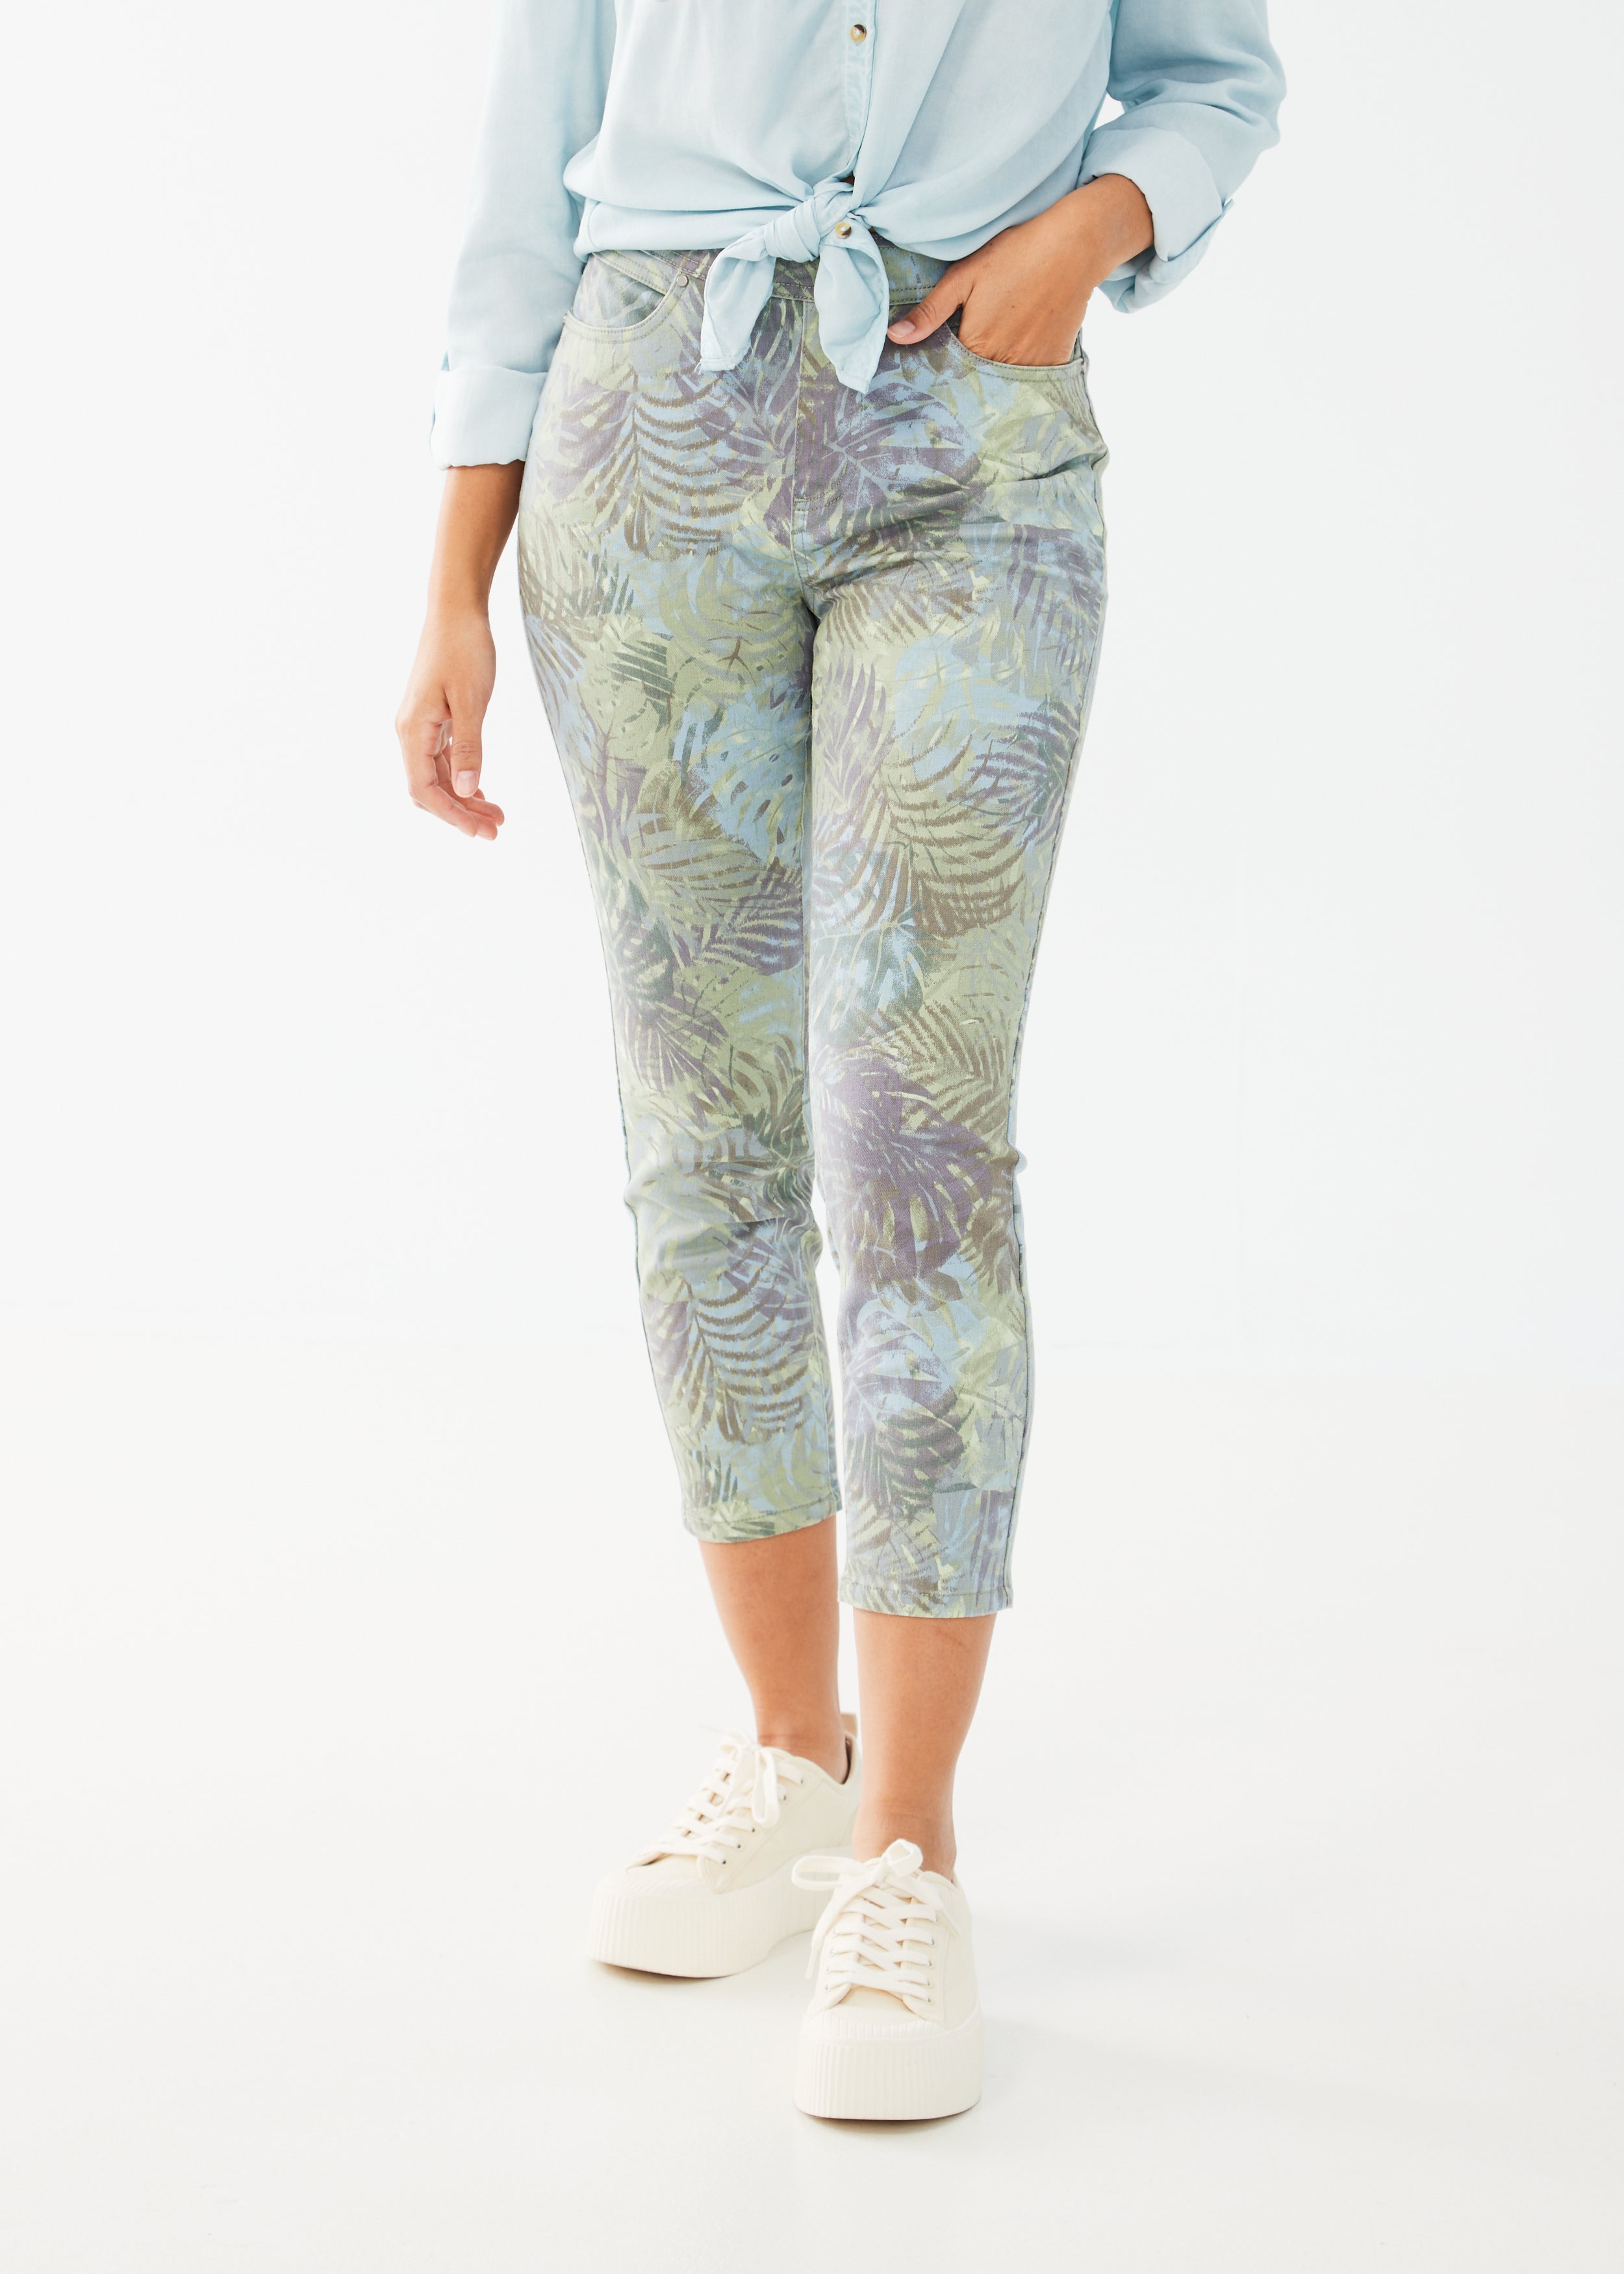 Get ready to make a statement with the FDJ Pull-On Slim Crop Pant, featuring a striking Tropical Camo Print!